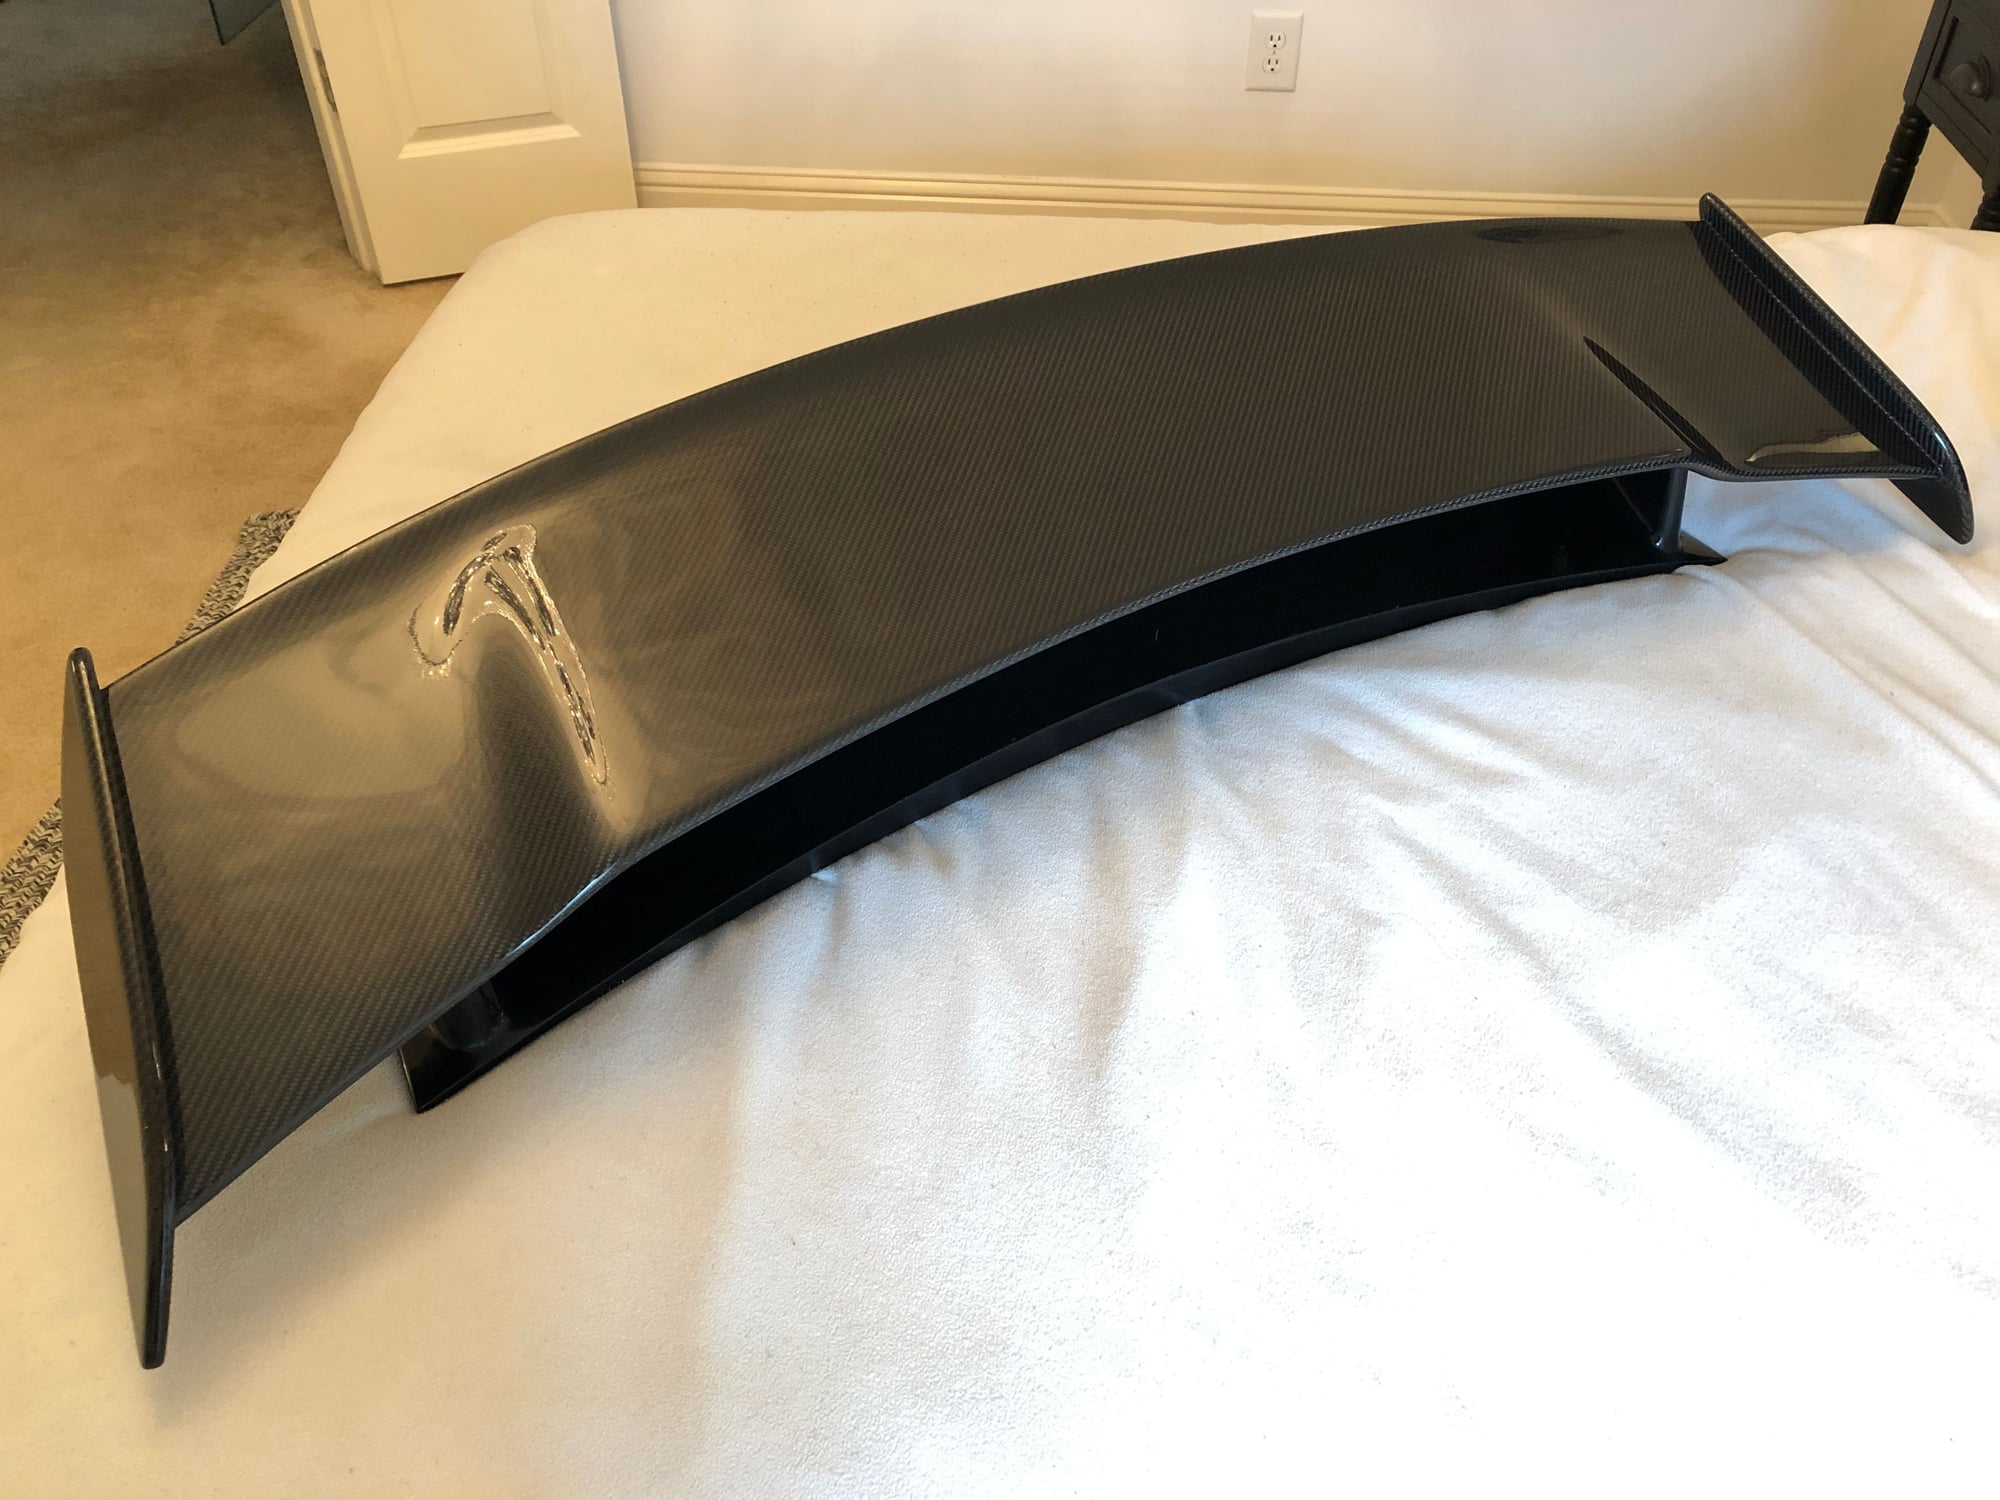 Exterior Body Parts - DarwinPro Carbon Wing Amg GT/GTS/GTC - Used - 2016 to 2019 Mercedes-Benz AMG GT - 2016 to 2019 Mercedes-Benz AMG GT C - 2016 to 2019 Mercedes-Benz AMG GT S - Atlanta, GA 30092, United States